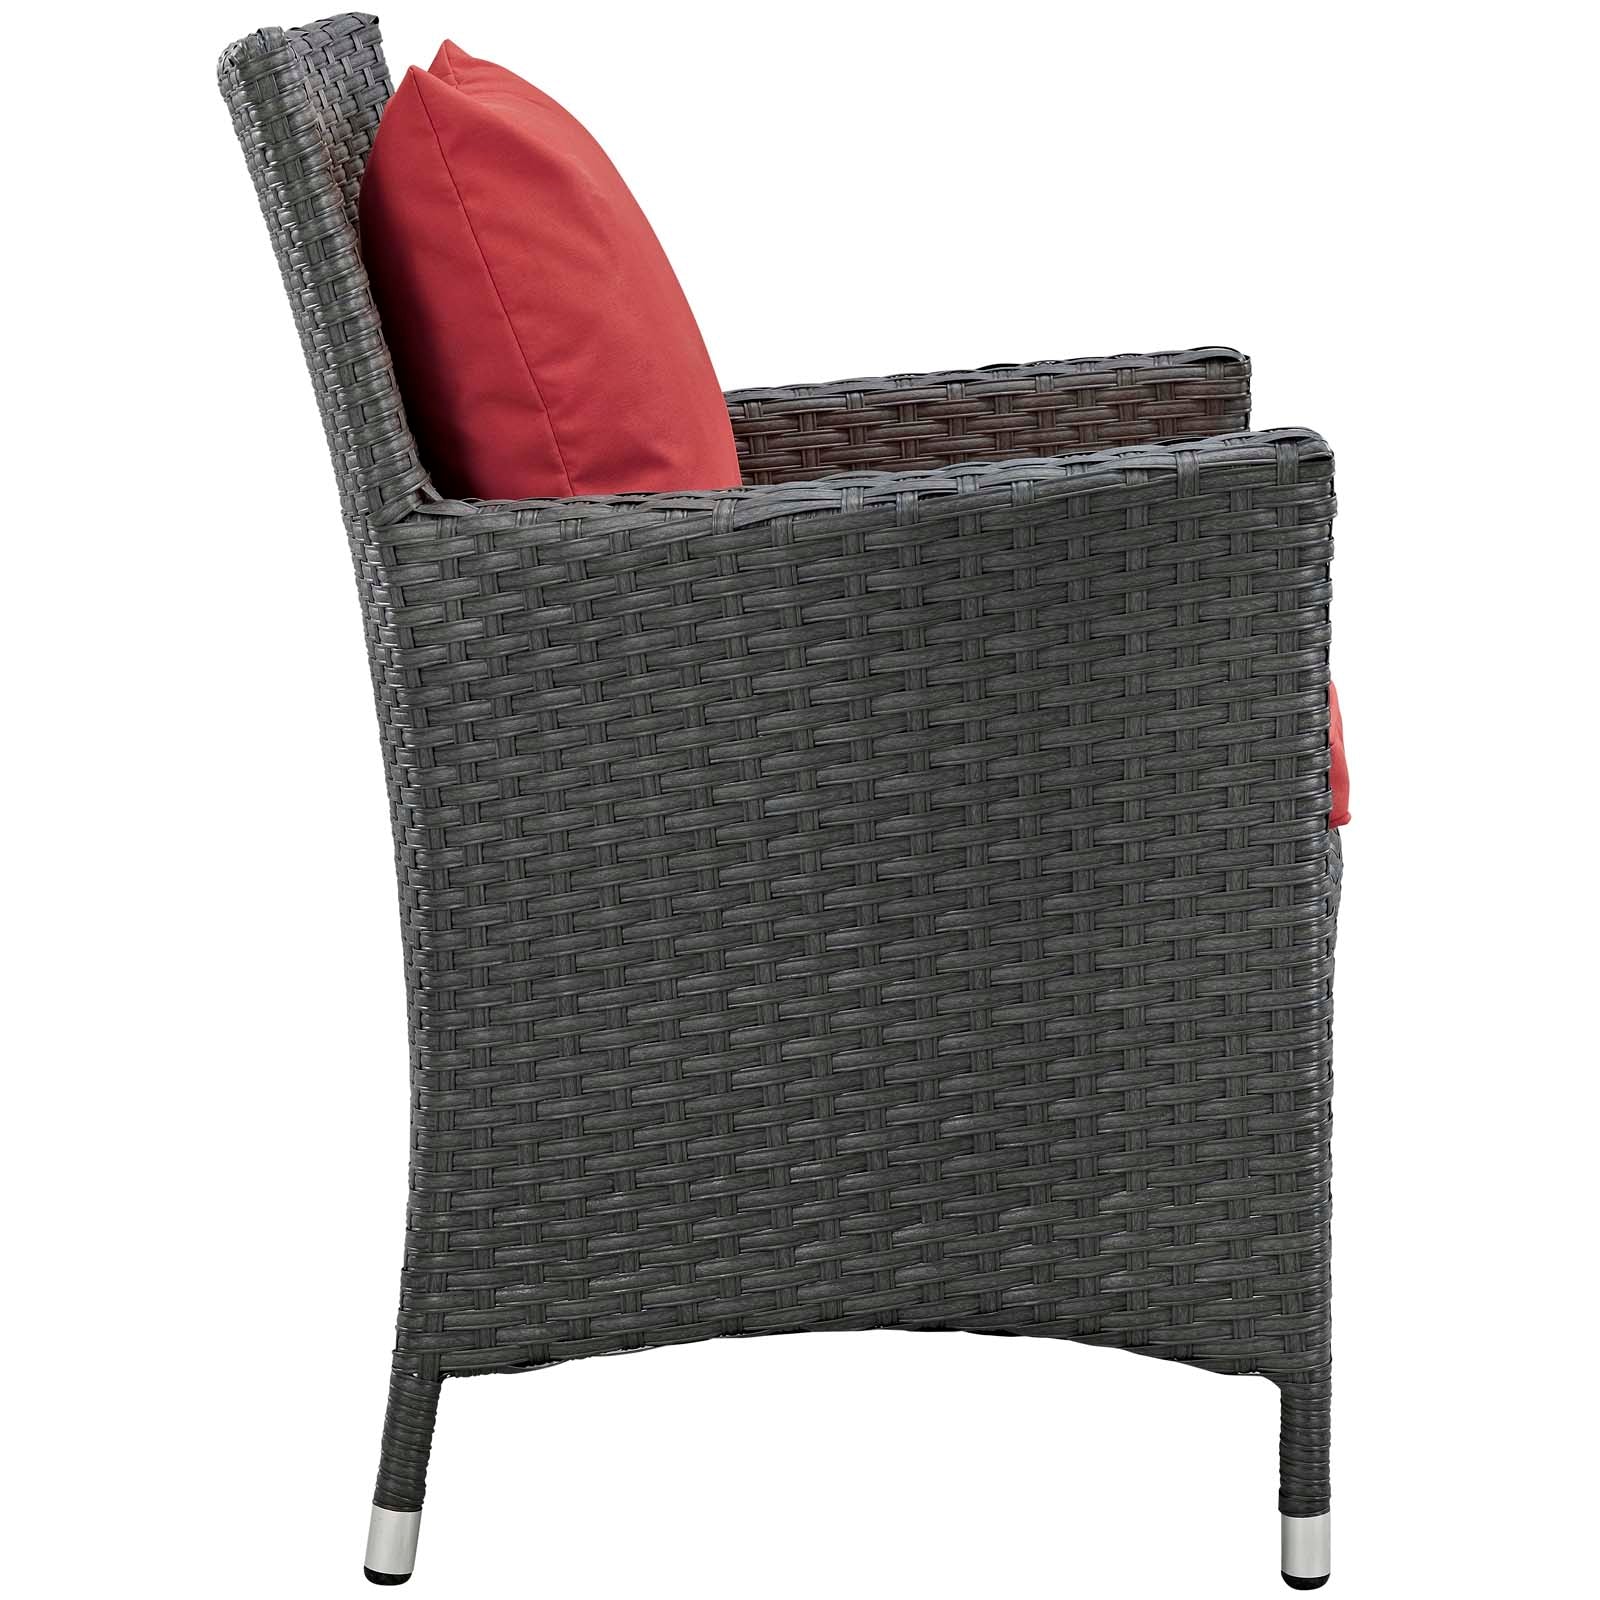 Modway Outdoor Dining Chairs - Sojourn Dining Outdoor Patio Sunbrella Armchair Canvas Red